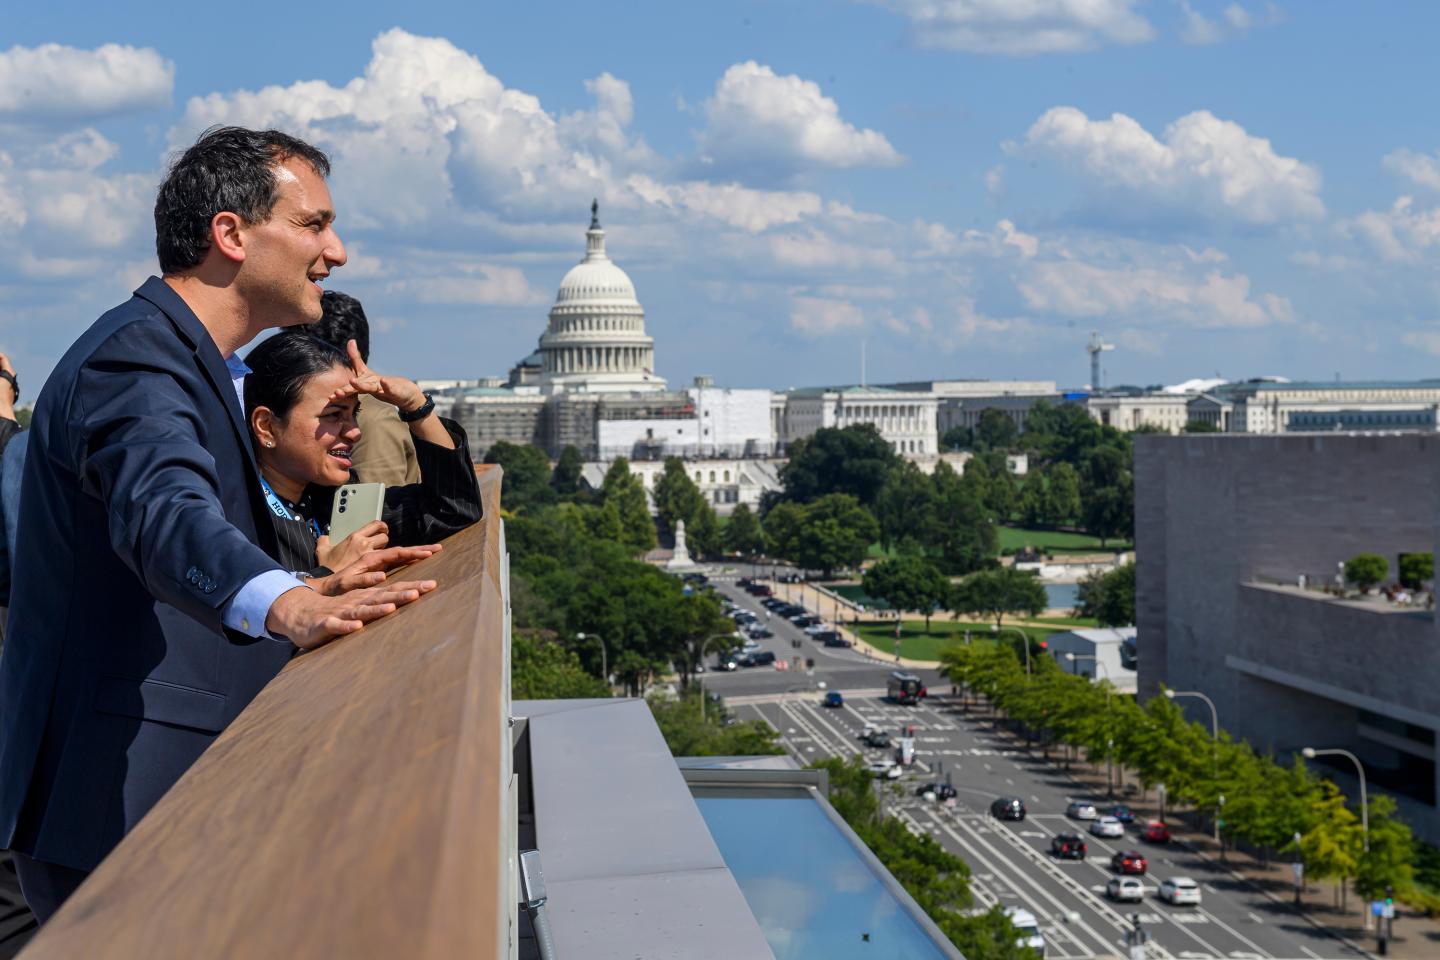 Two people stand on the roof and look out on Pennsylvania Avenue; the U.S. Capitol dome is prominently visible in the background